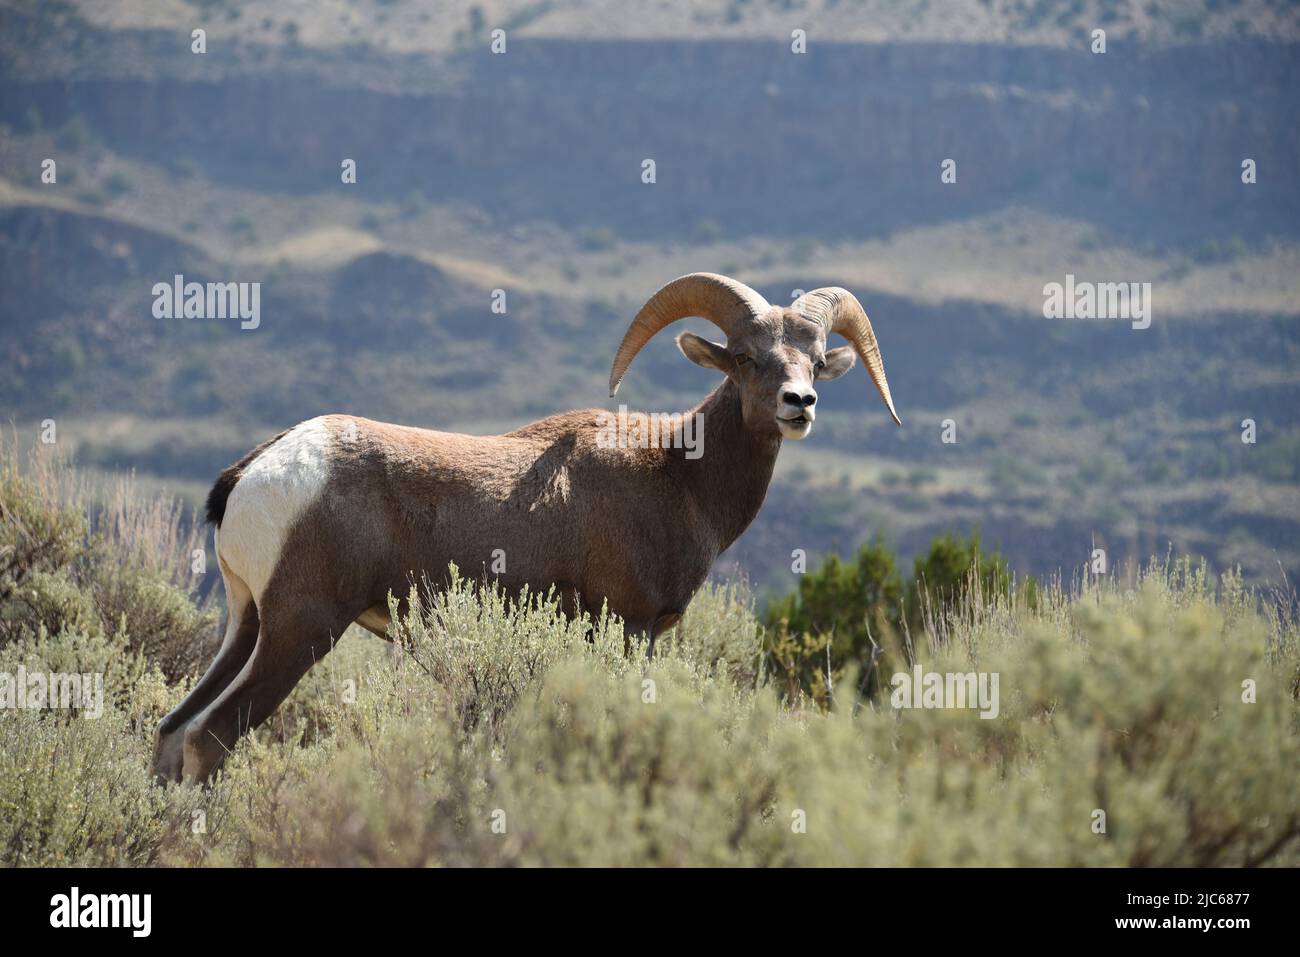 Close up of a wild Big Horned Sheep high on a mountainside along the Rio Grande river in Northern, New Mexico, USA.  Note the large format. Stock Photo